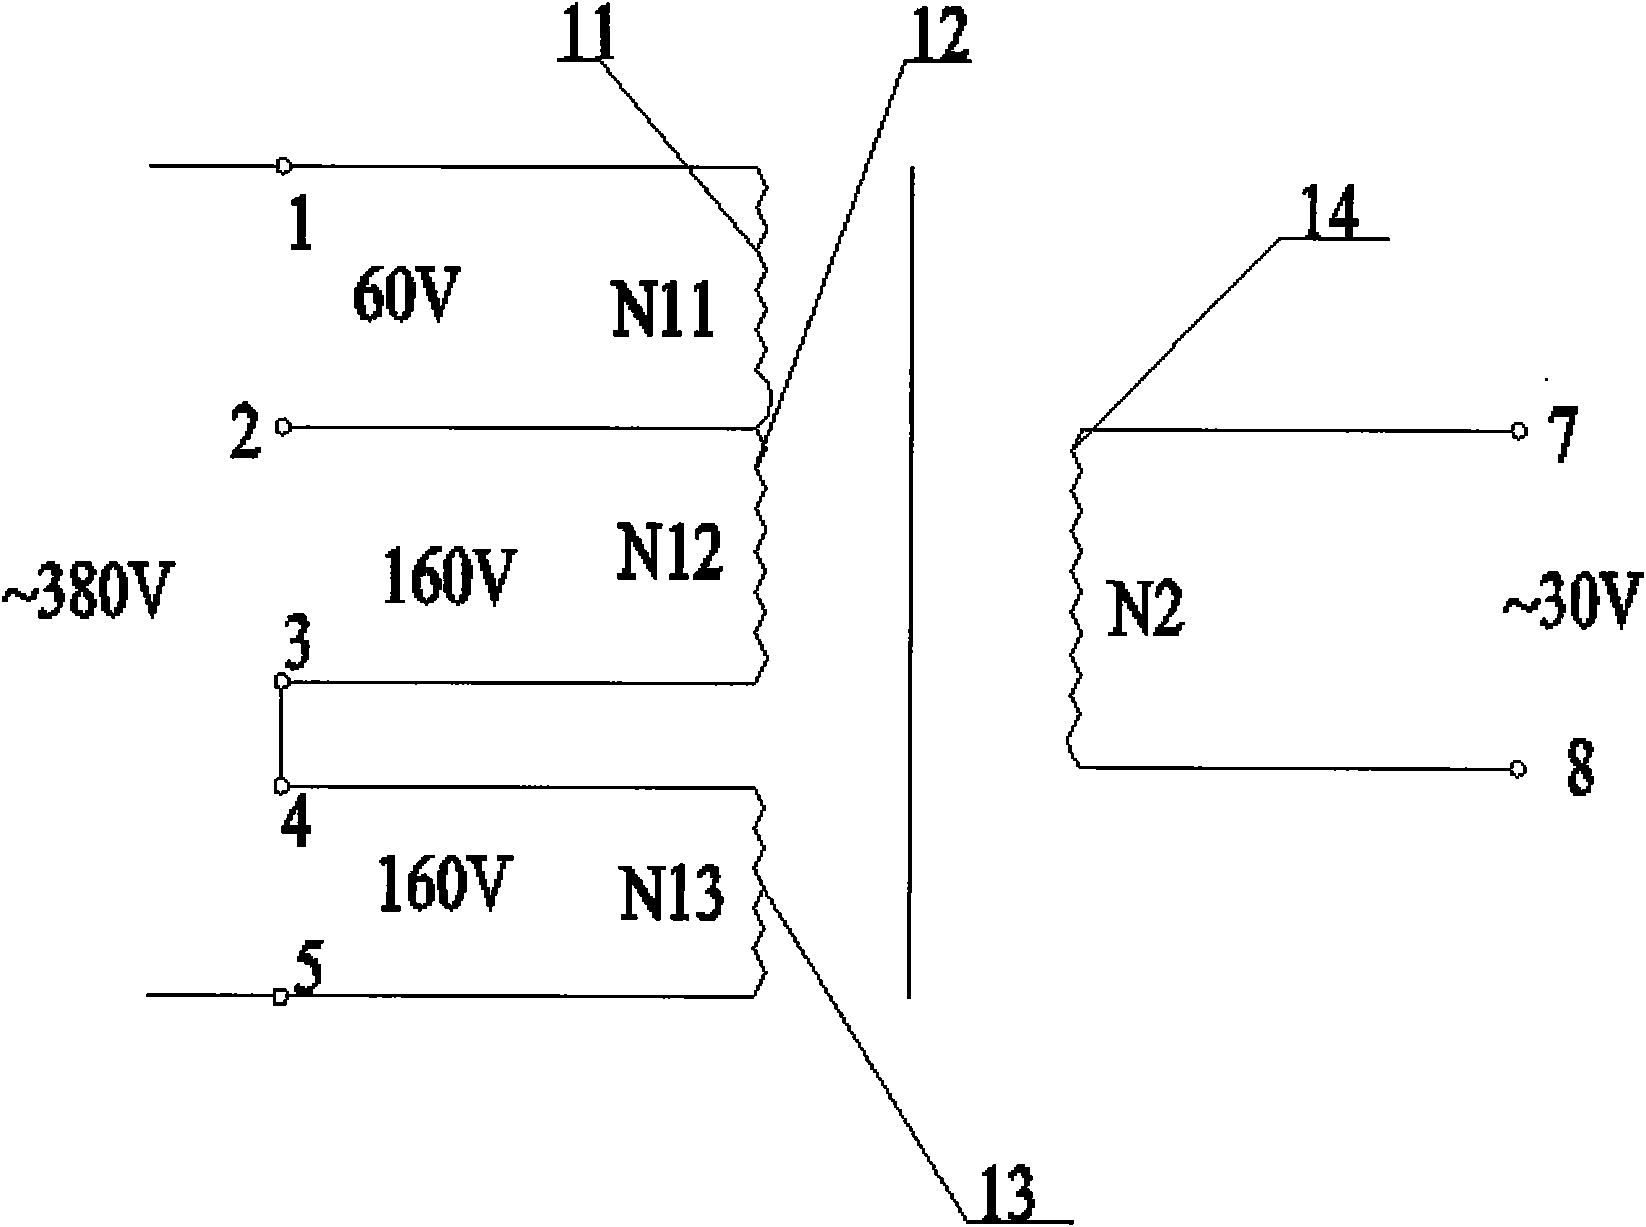 Primary coil winding structure of power supply transformer